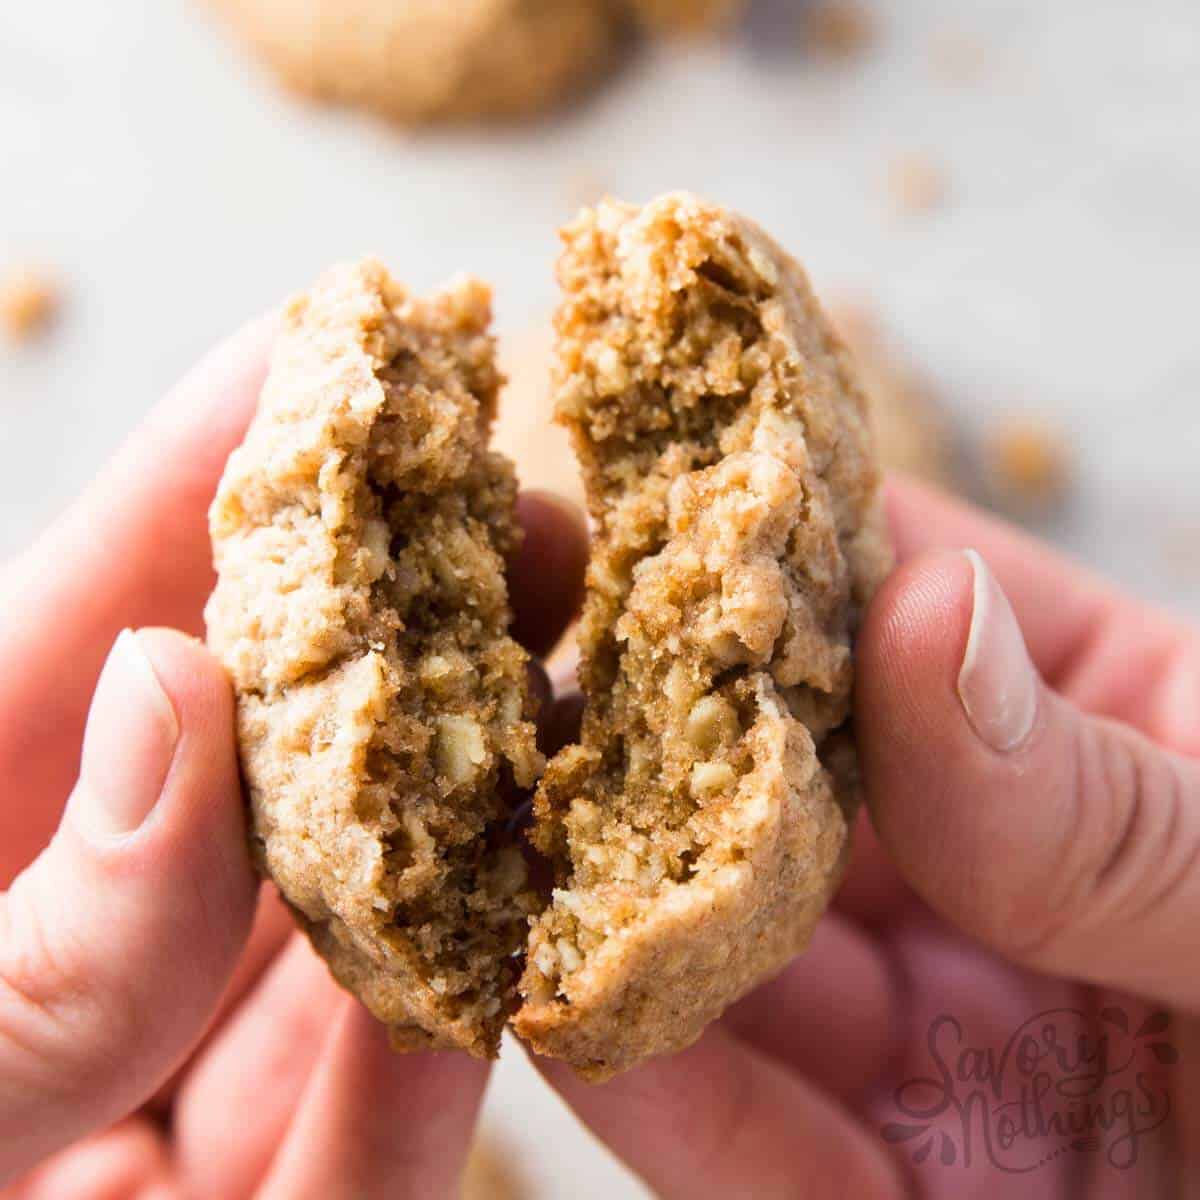 hands holding cracked oatmeal cookie